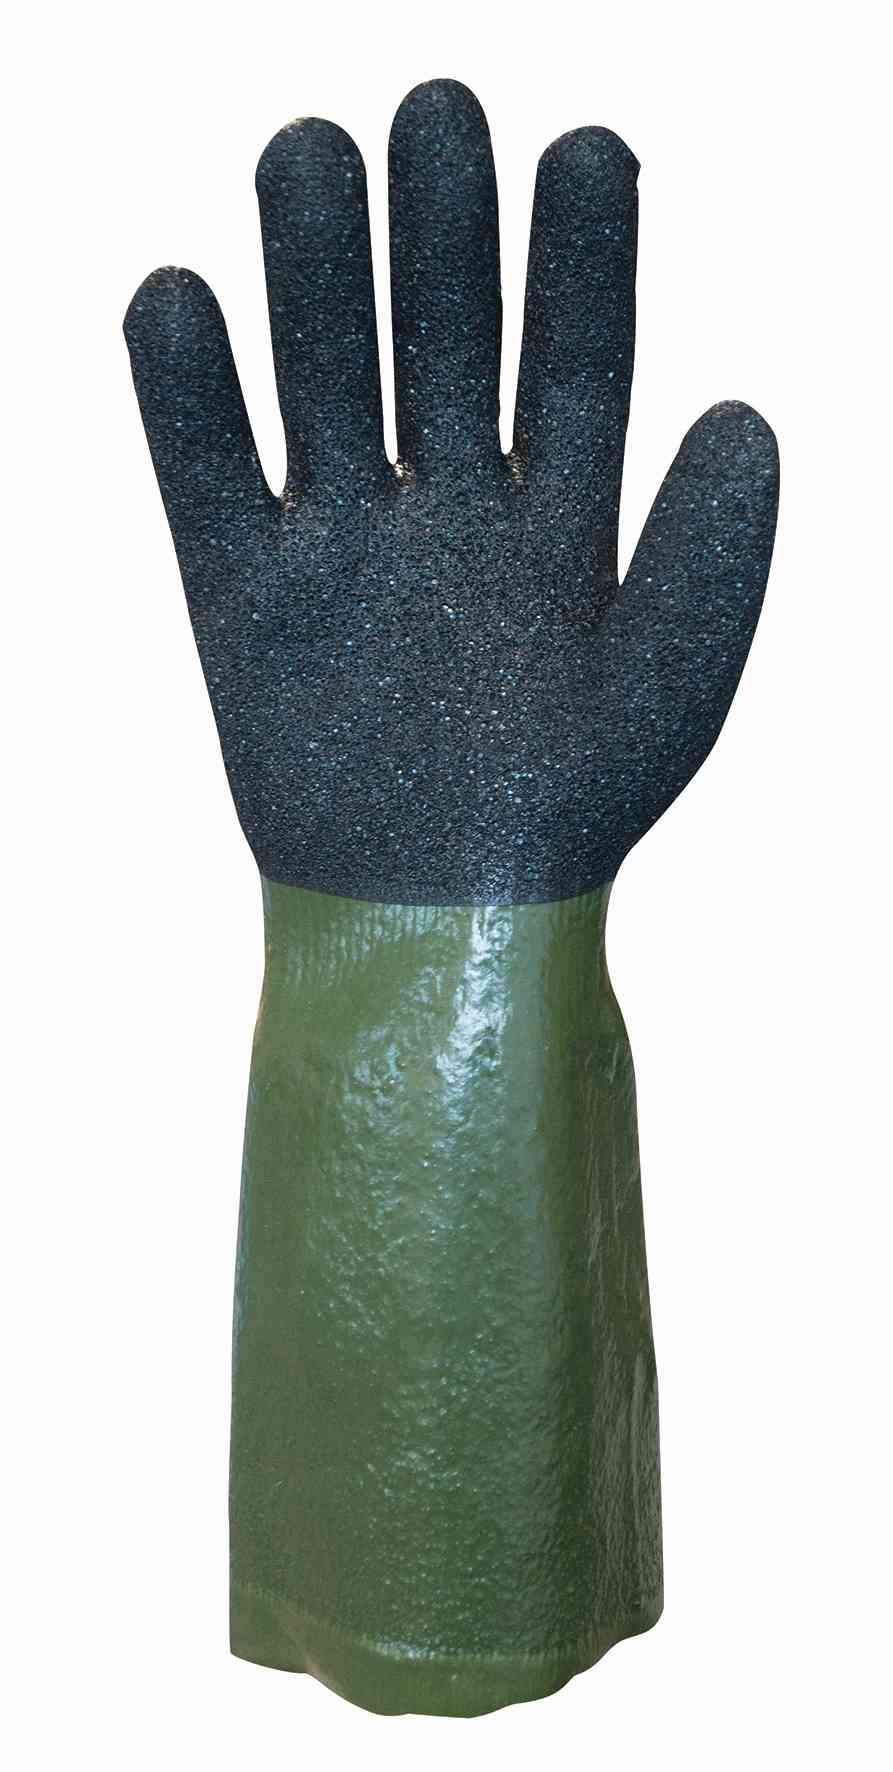 Polyco GIOG5 Grip It Oil Safety Gauntlets Cut 5 Resistant PVC Coated